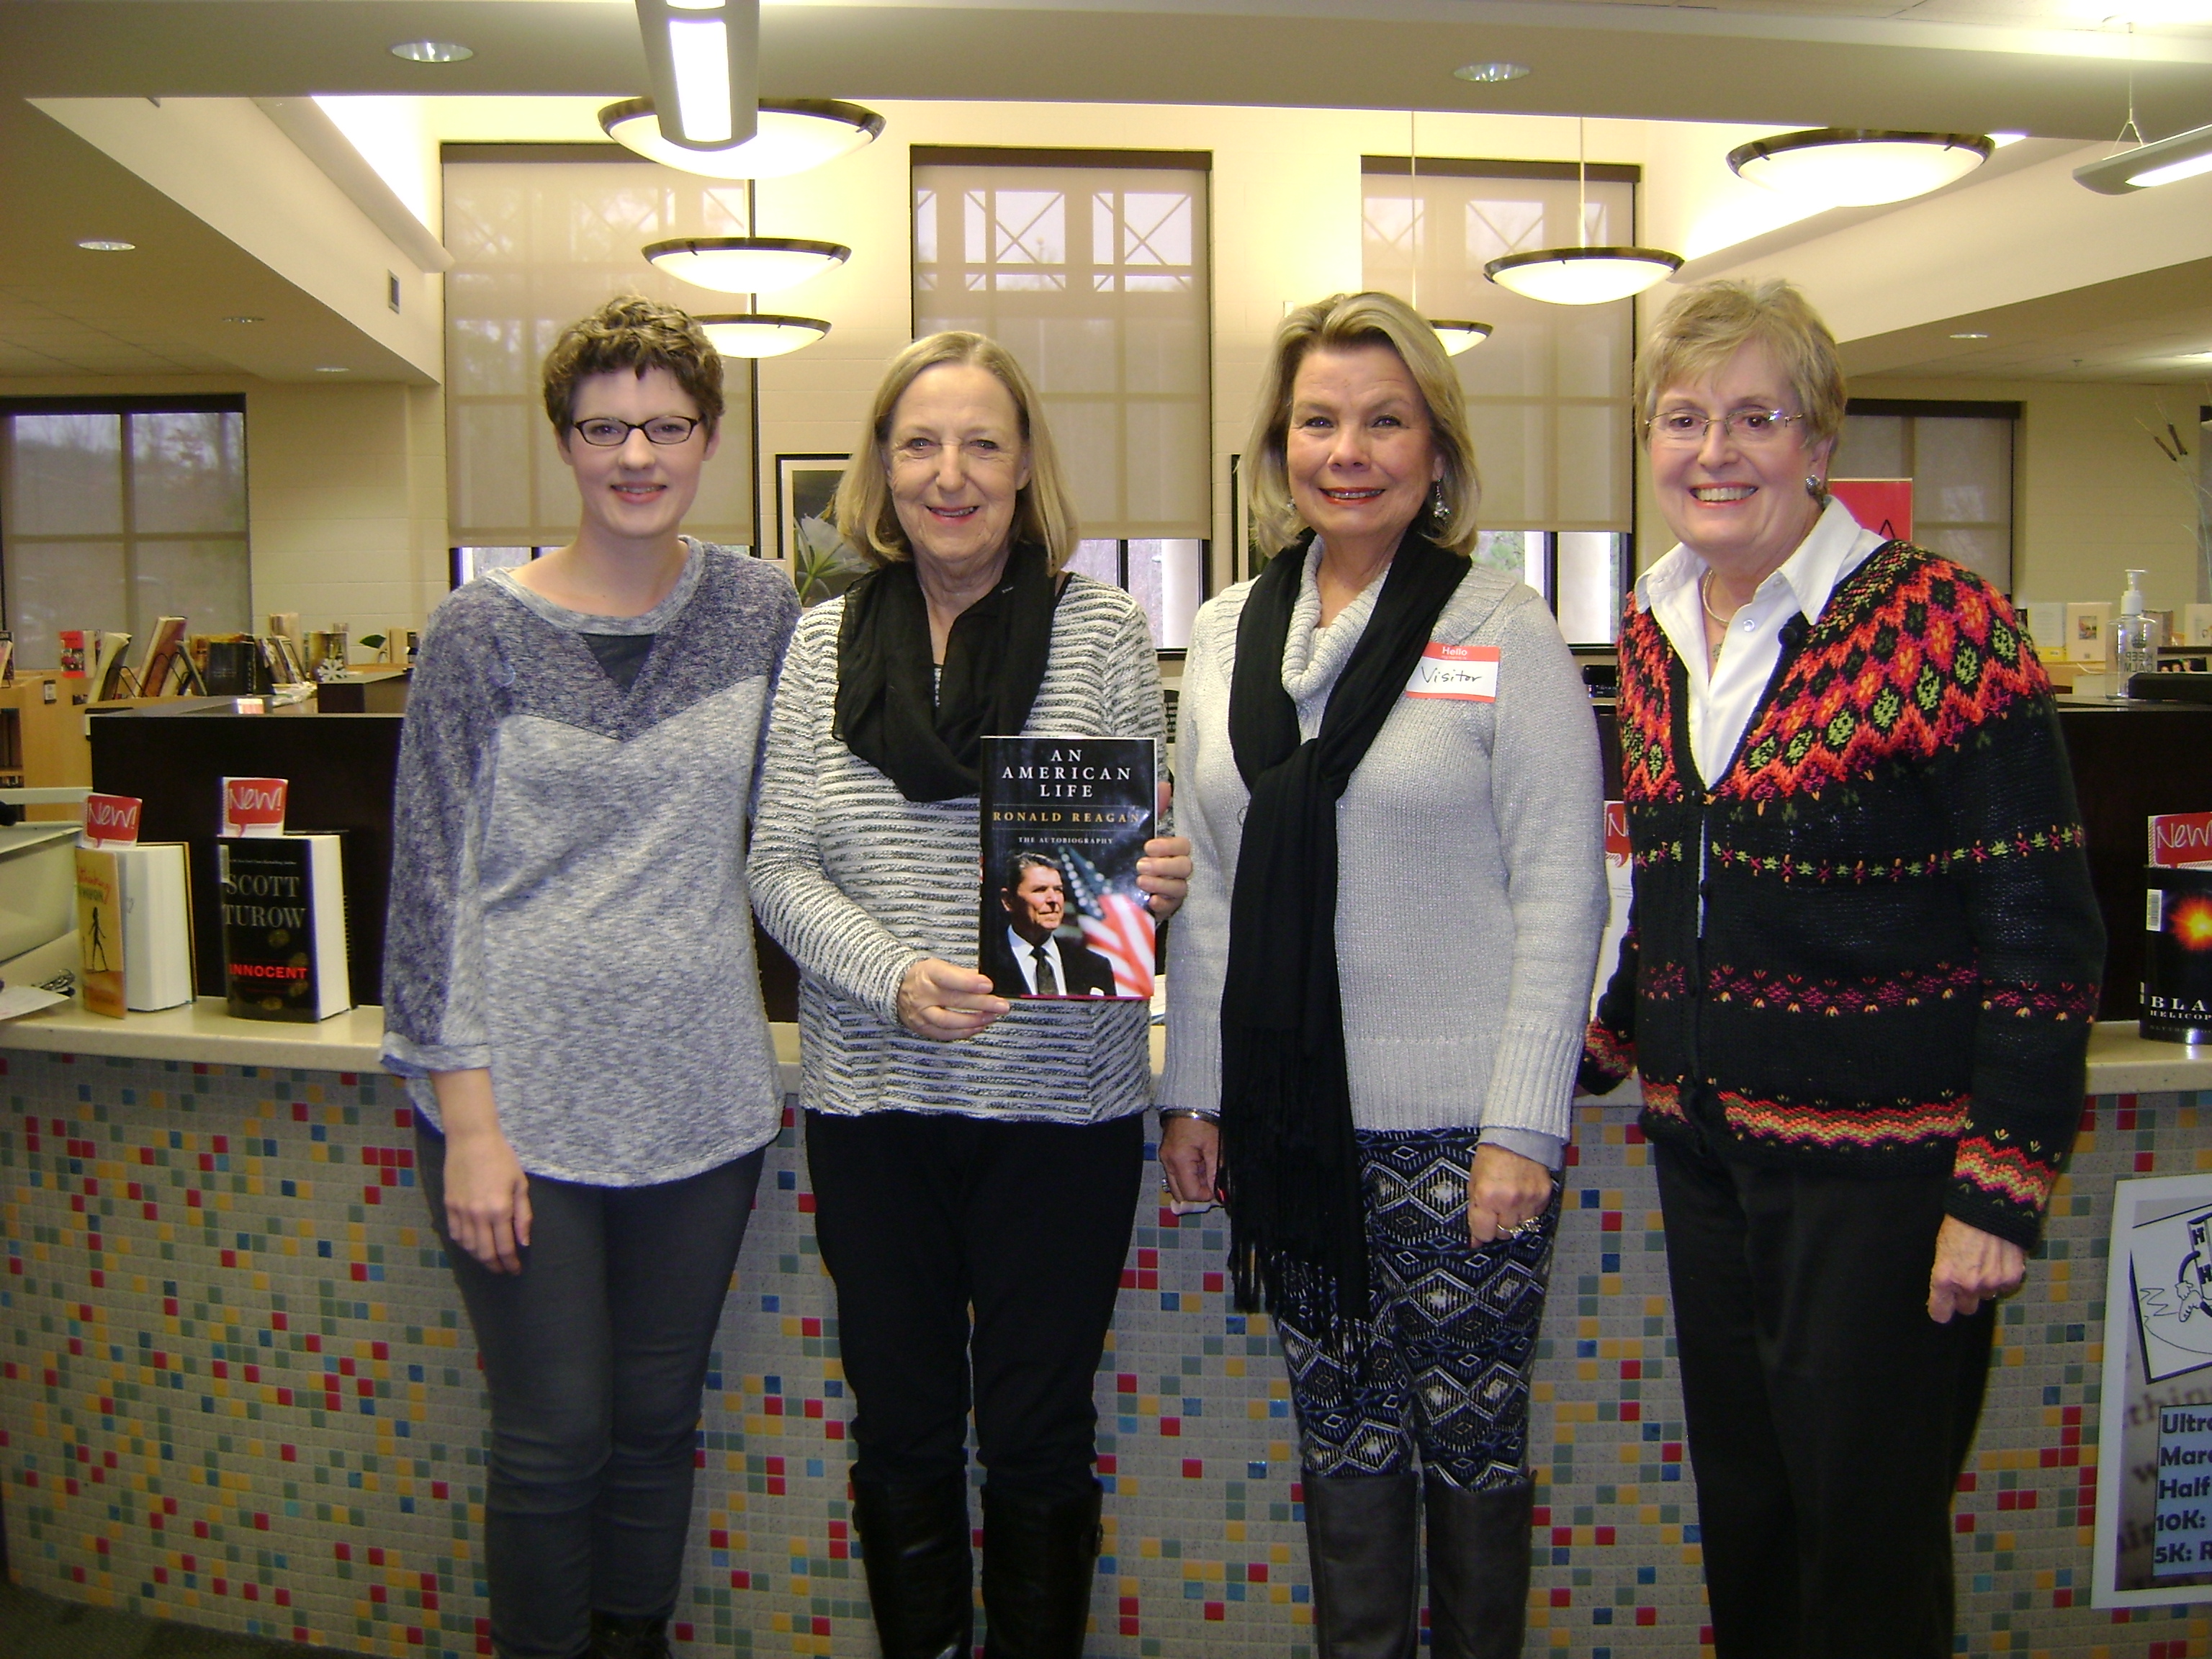 Republican group donates book to HTHS library 